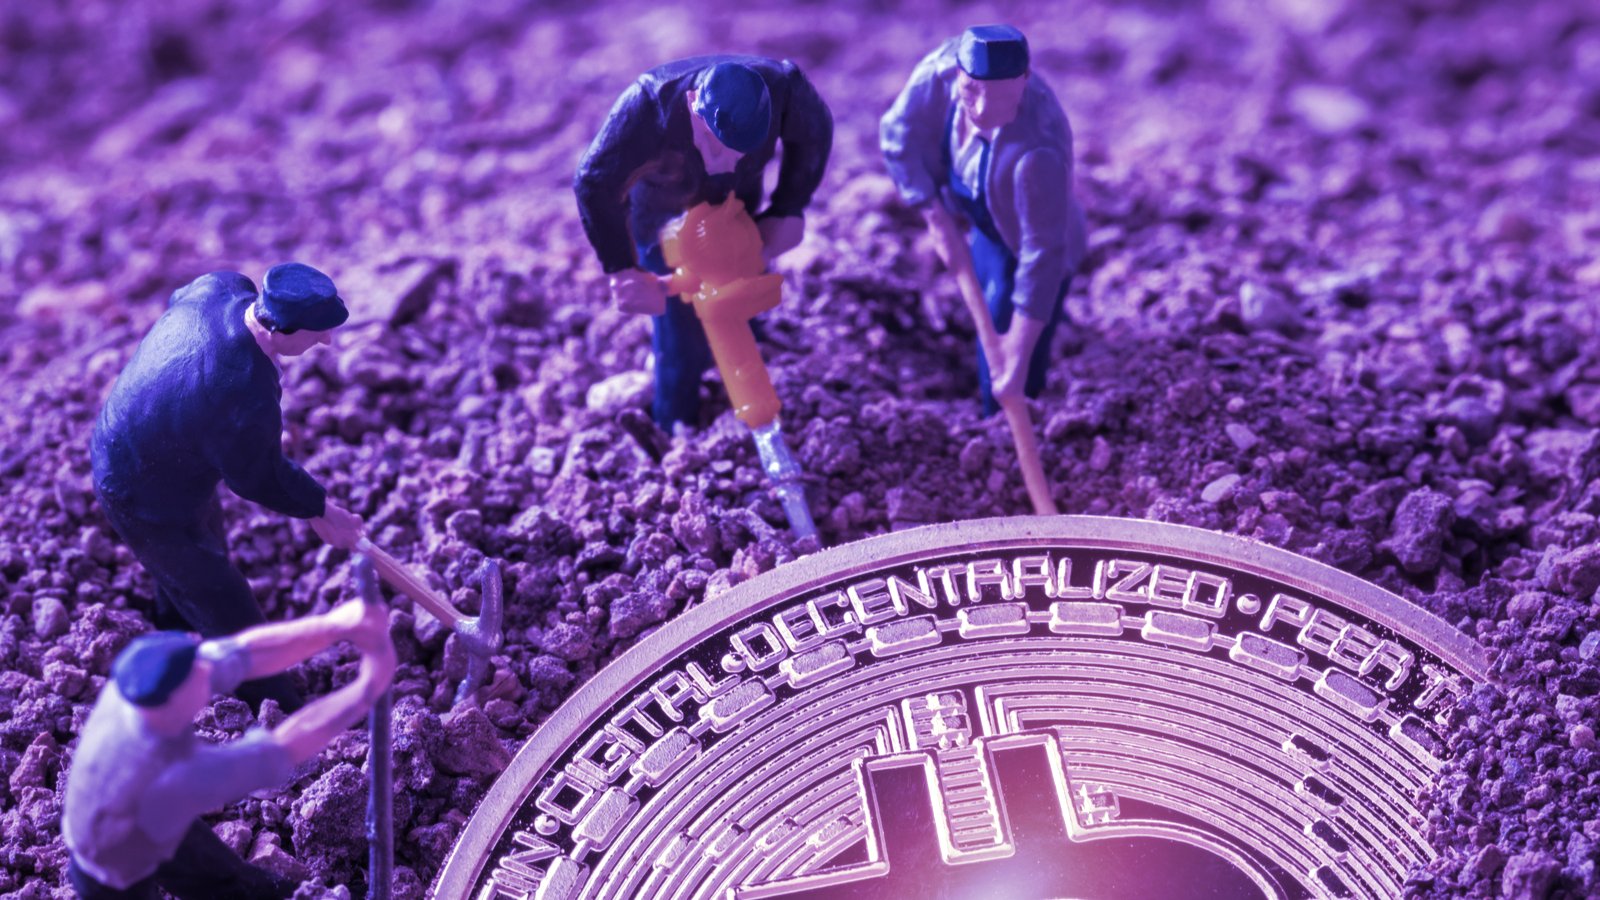 Celsius Gets Approval to Sell Mined Bitcoin to Pay for Operations